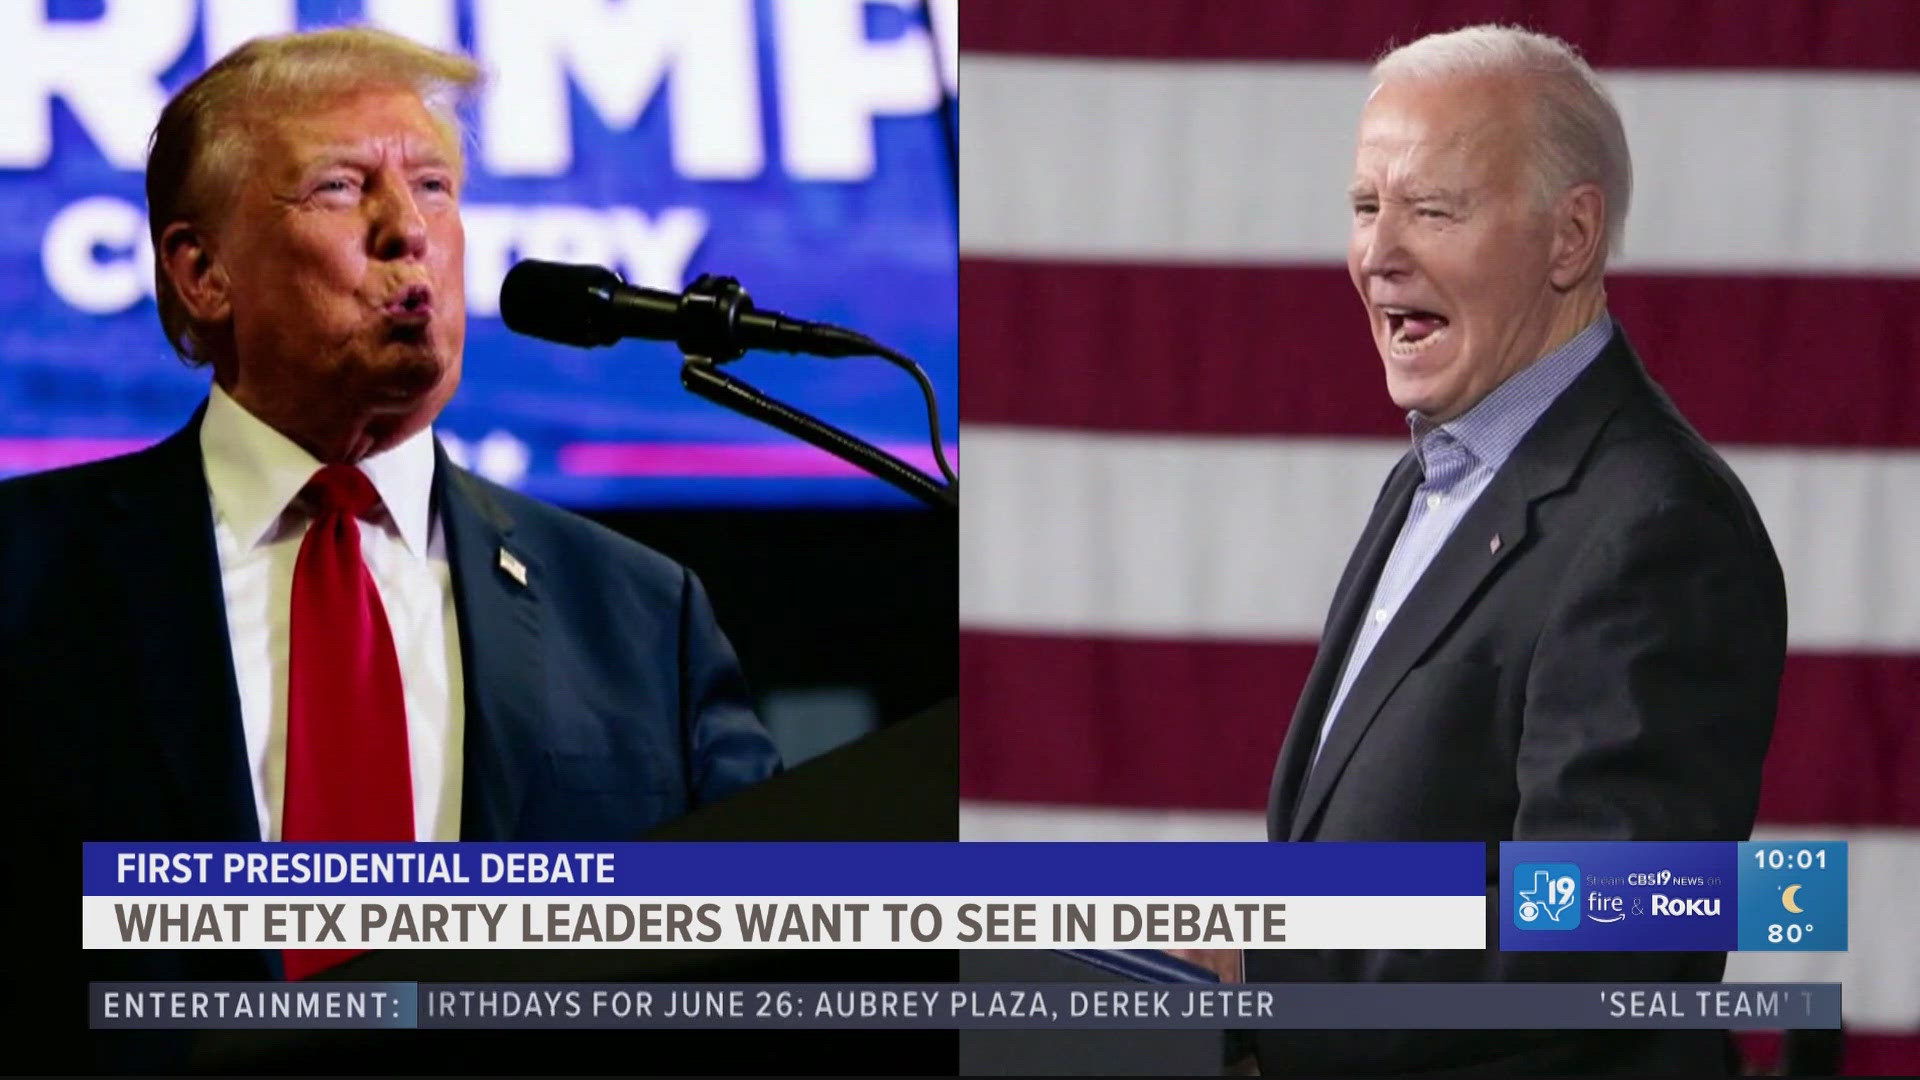 It’ll be a unique setup – no other opponents, no audience, just the two candidates and the moderator.